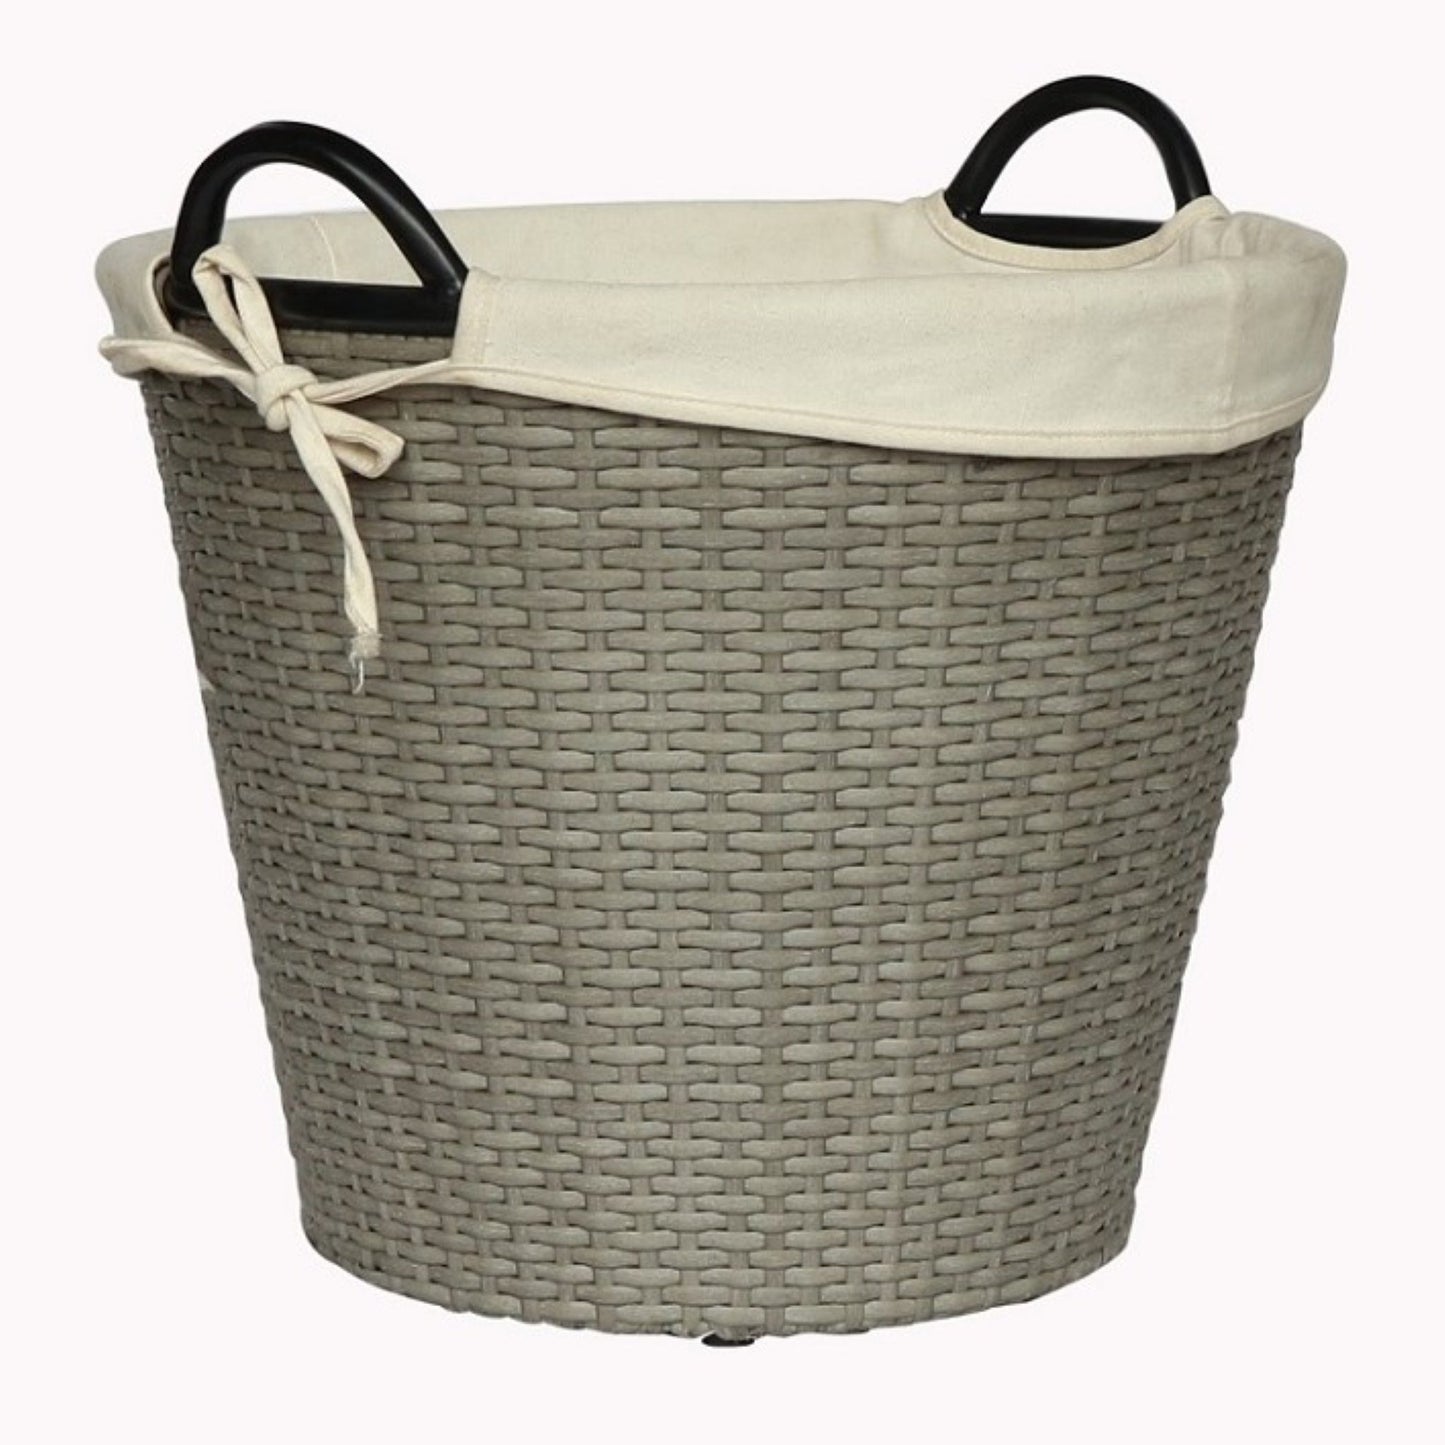 PAPUA 3-Piece Set Poly Rattan Wicker Large Basket with Fabric Lining - Grey - Direct Factory Furniture Australia